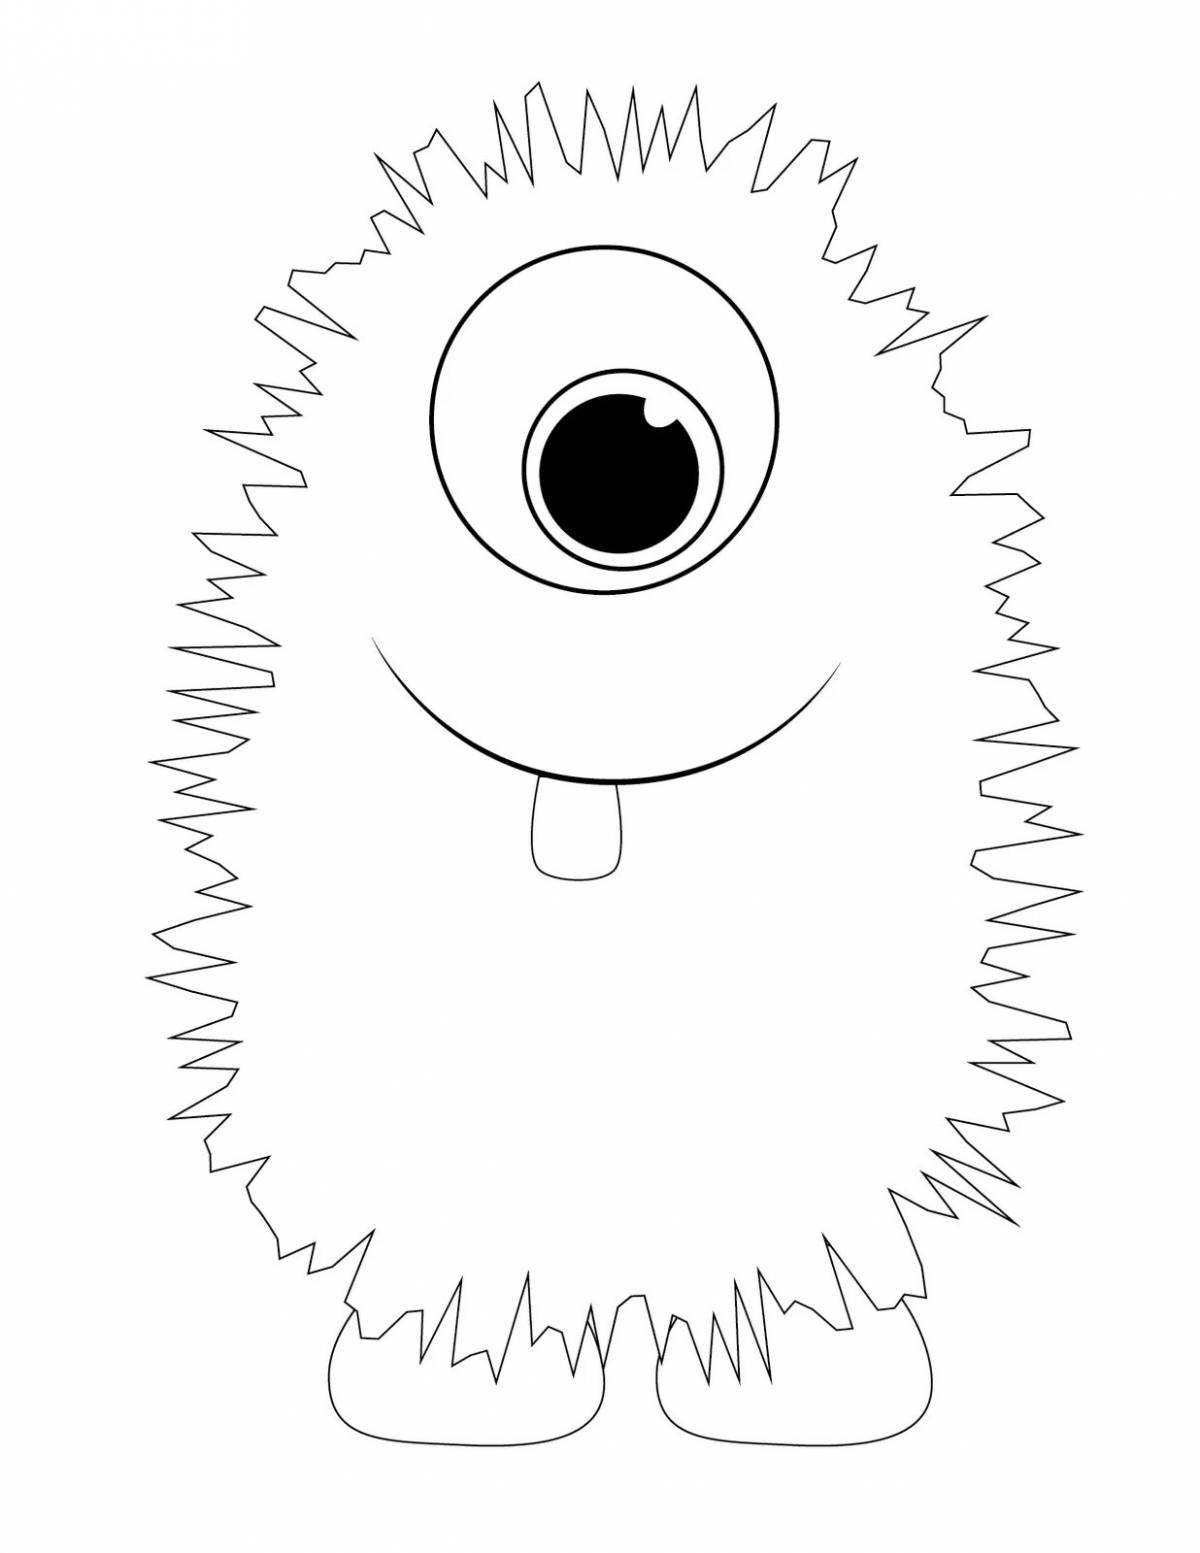 Outrageous monster coloring pages for kids